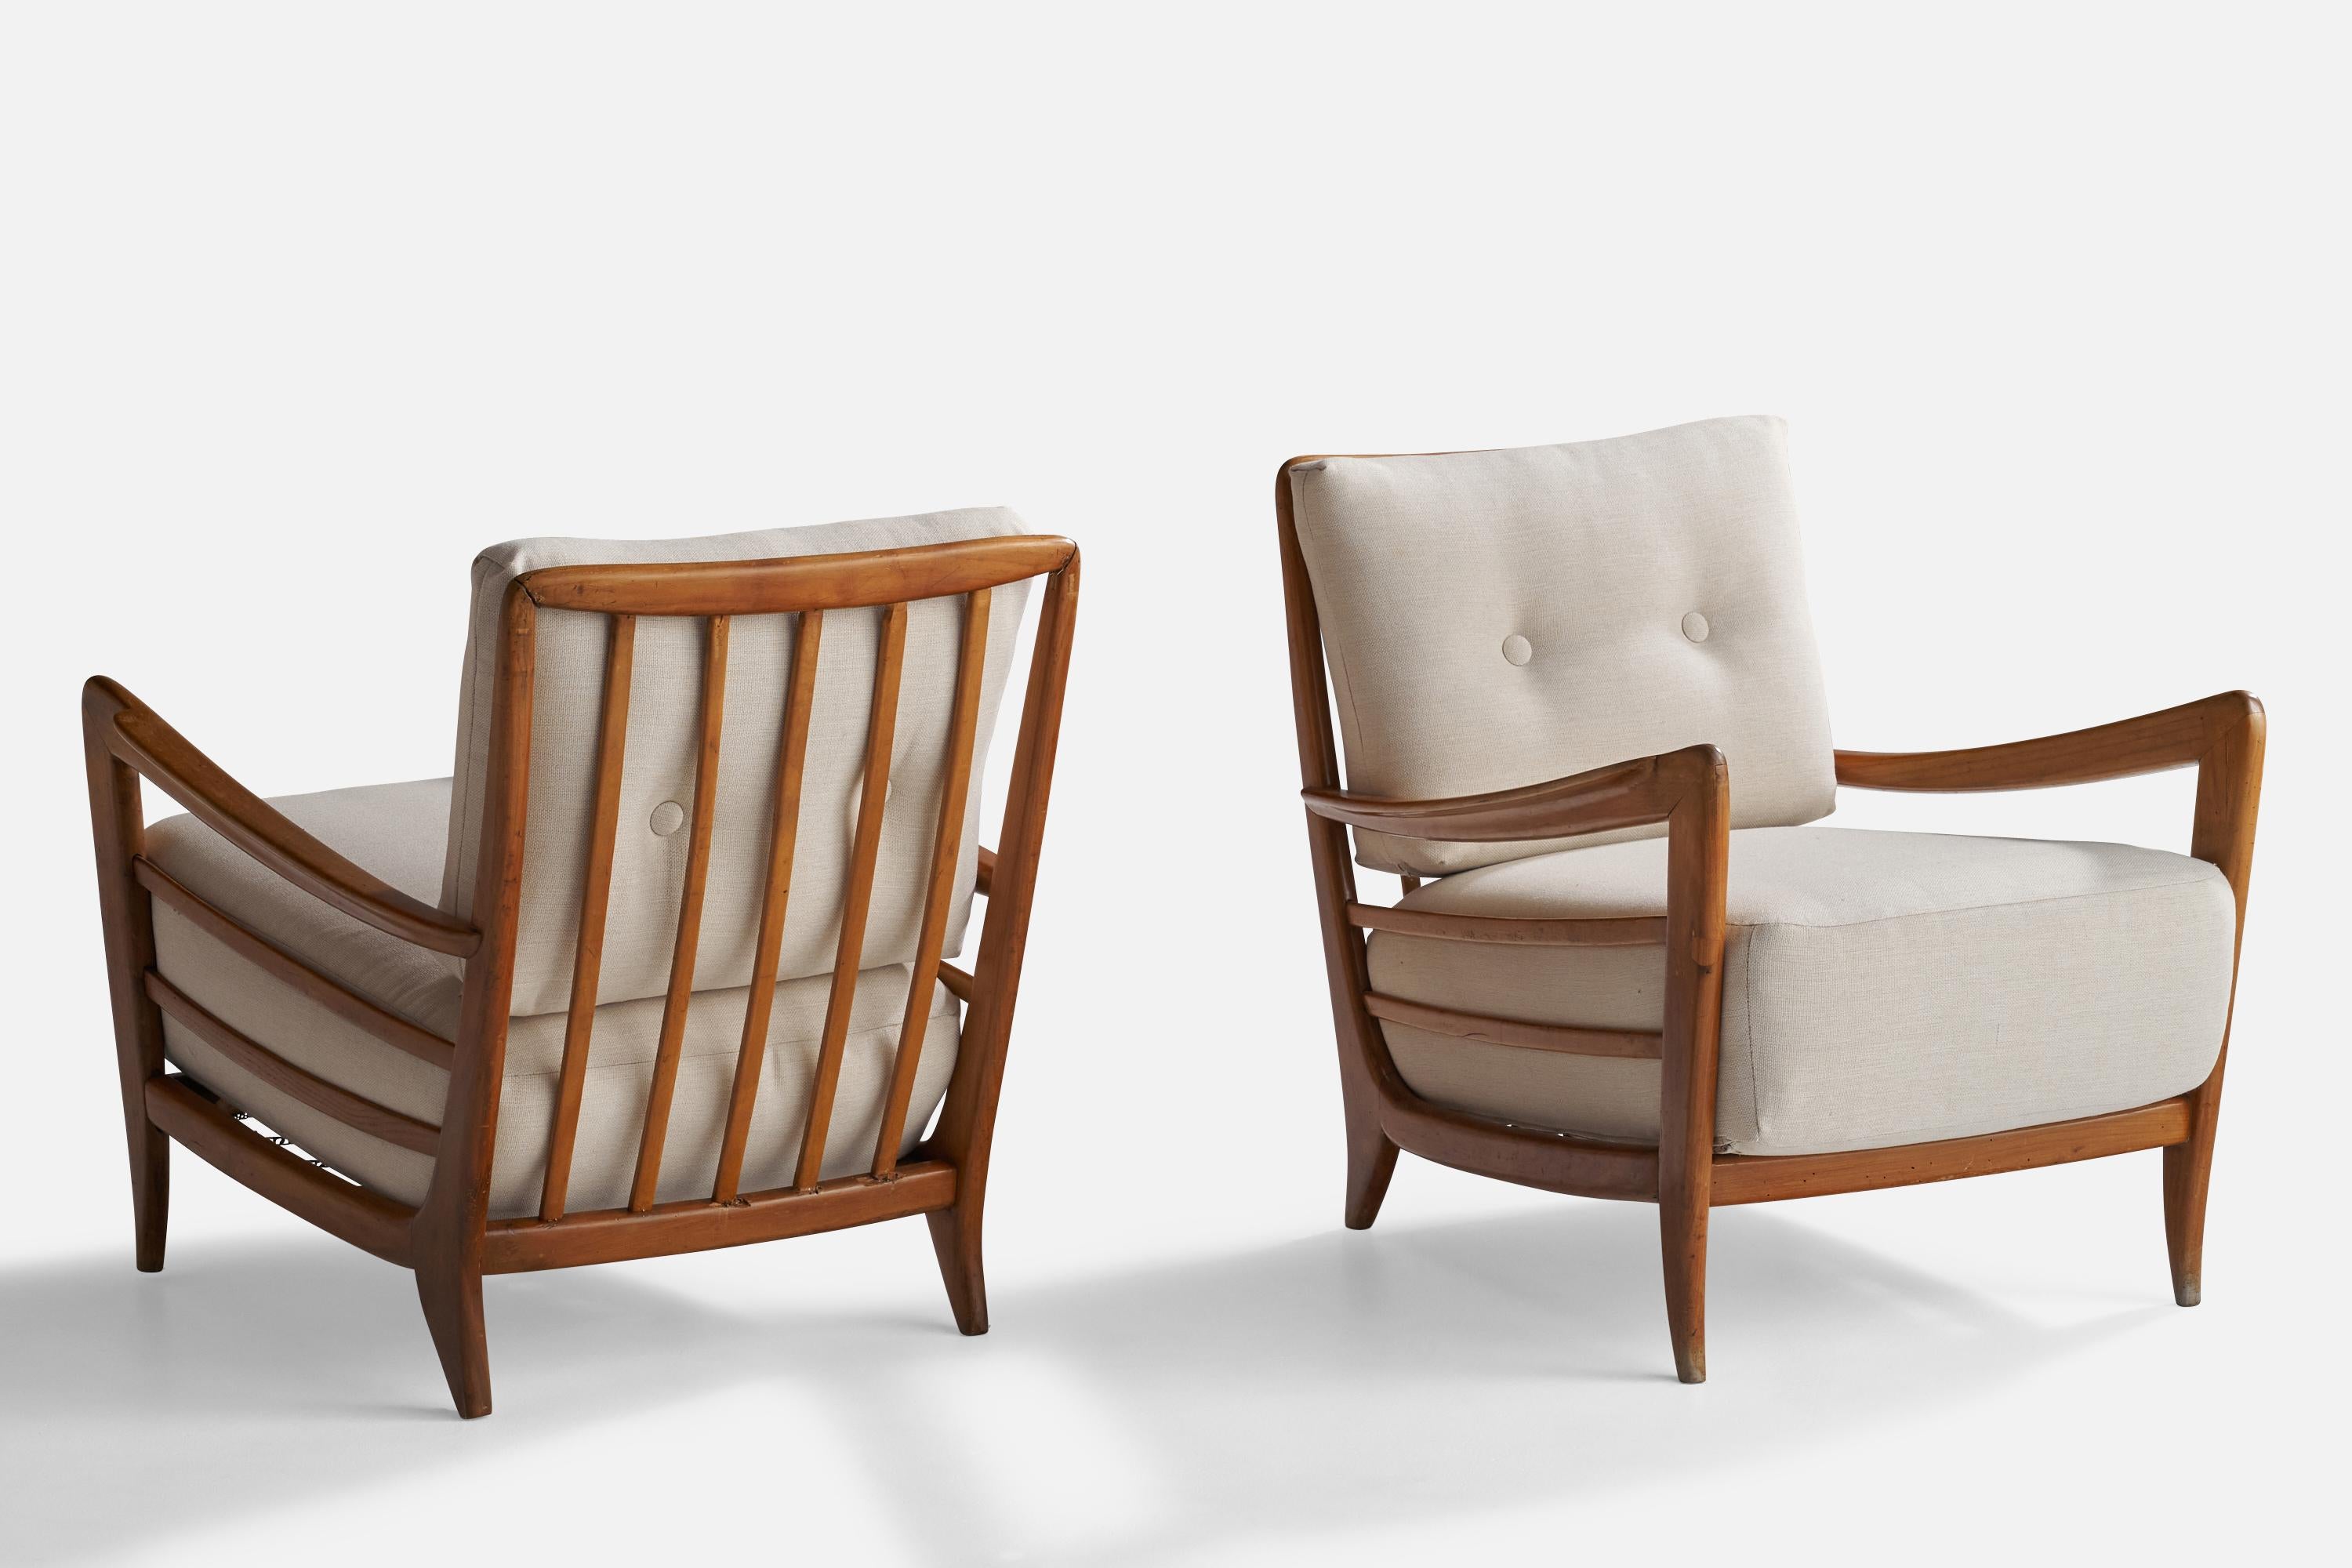 A pair of walnut and white fabric lounge chairs; design and production attributed to Paolo Buffa, Italy, 1940s.

Seat height 16.5